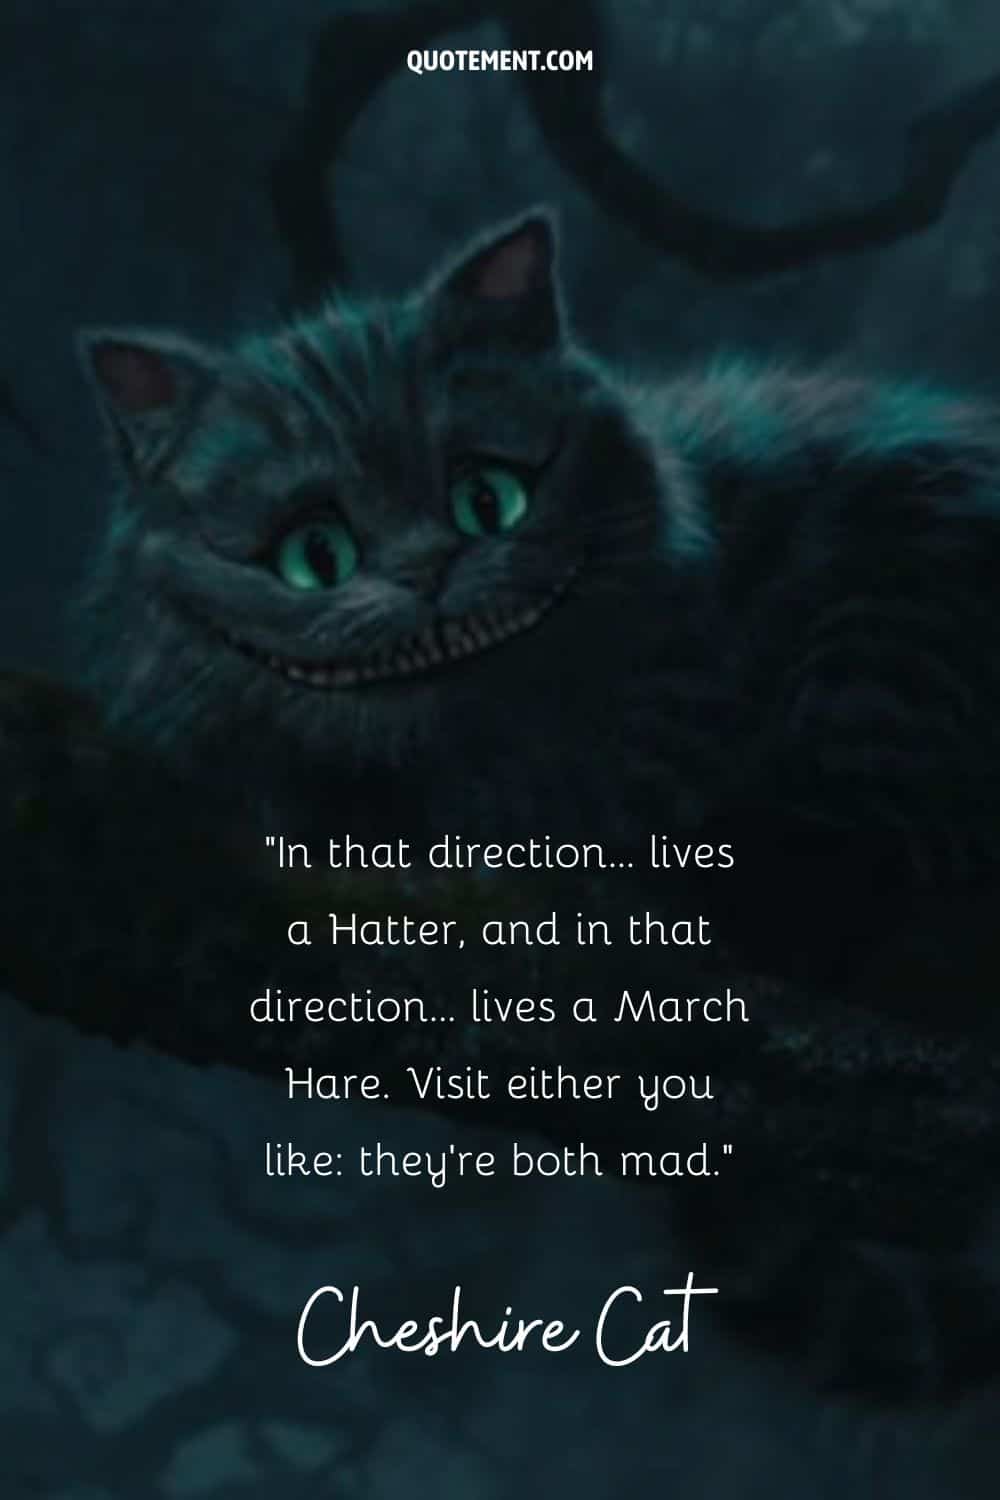 Quote from the Cheshire Cat and its image in the background